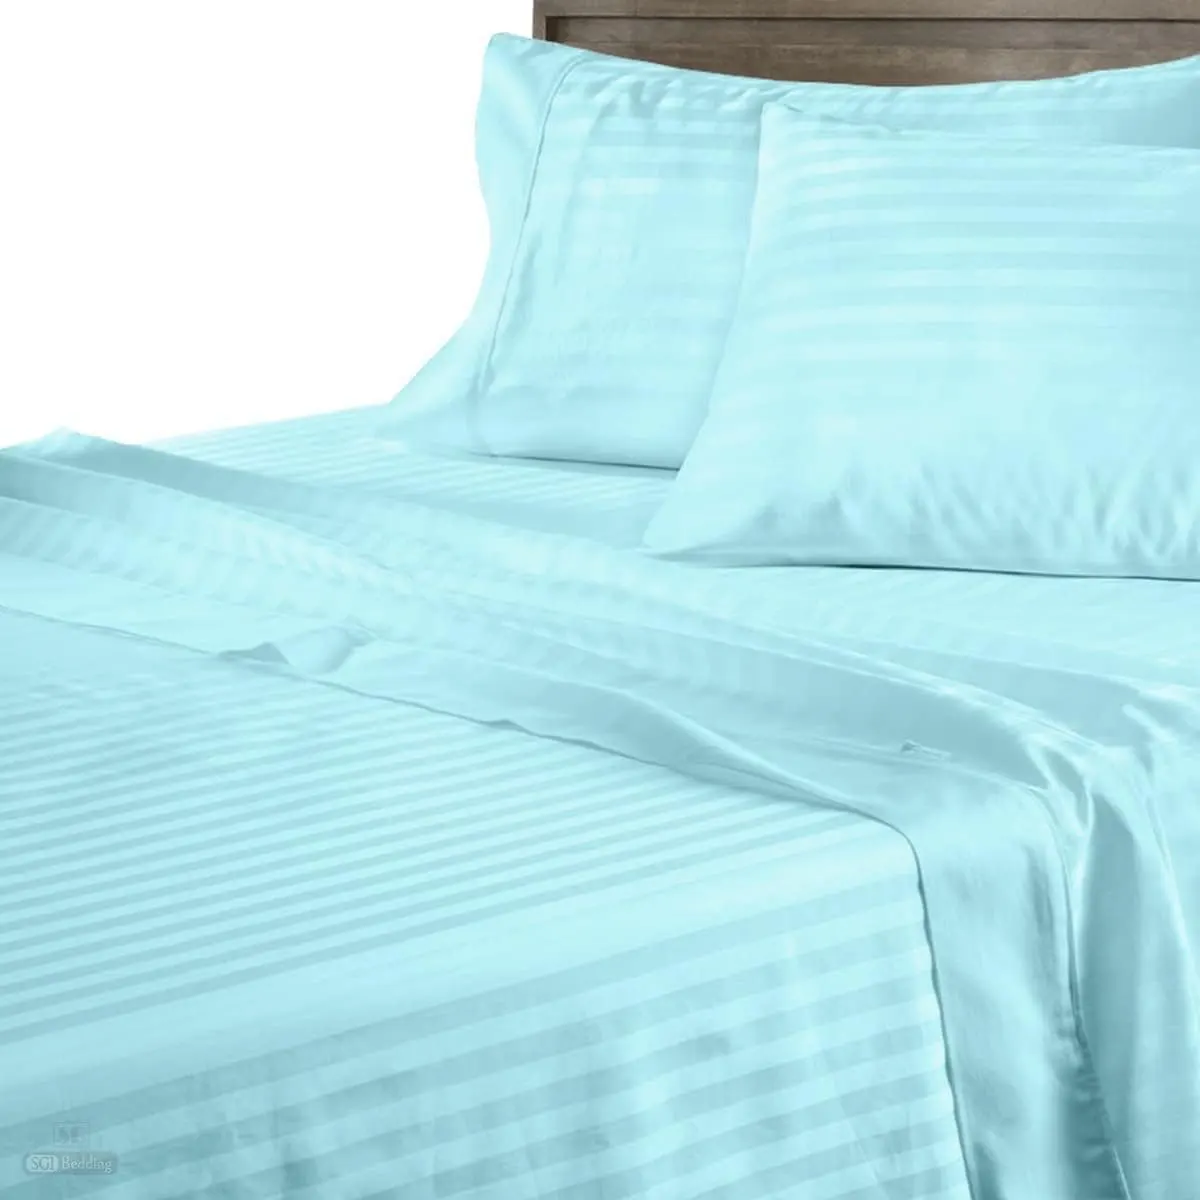 Classy Stripe Fitted Sheet Set, Size 180*200 cm, 4 Pieces, light blue